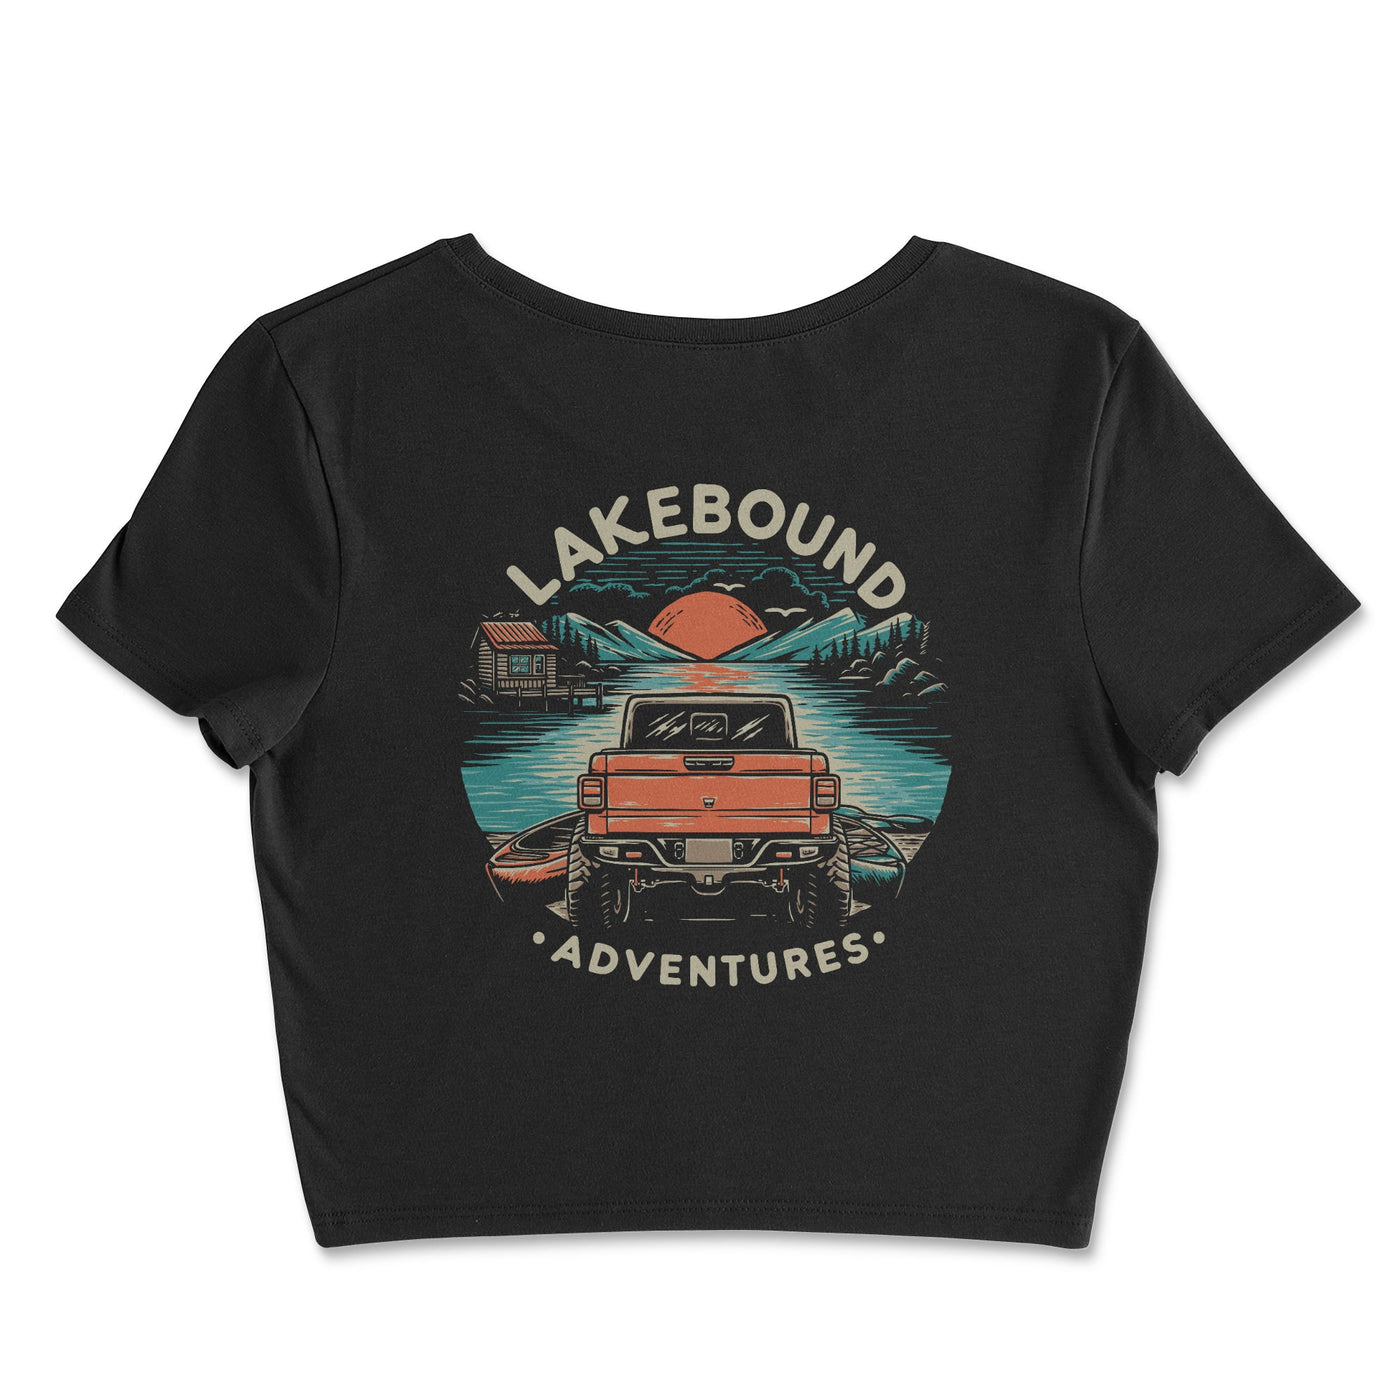 Lakebound Adventures Women's Crop Top - Goats Trail Off-Road Apparel Company